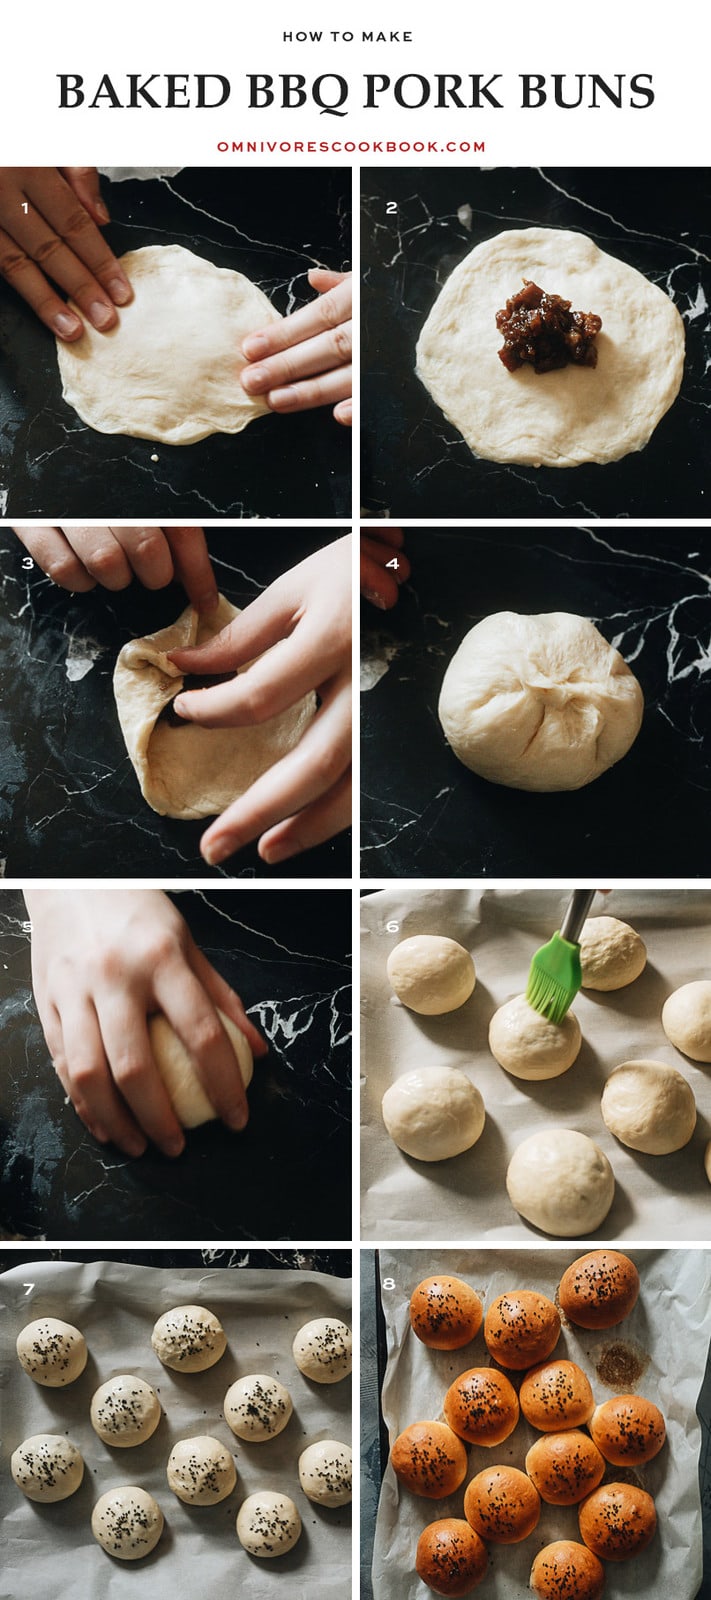 How to make baked BBQ pork buns step-by-step